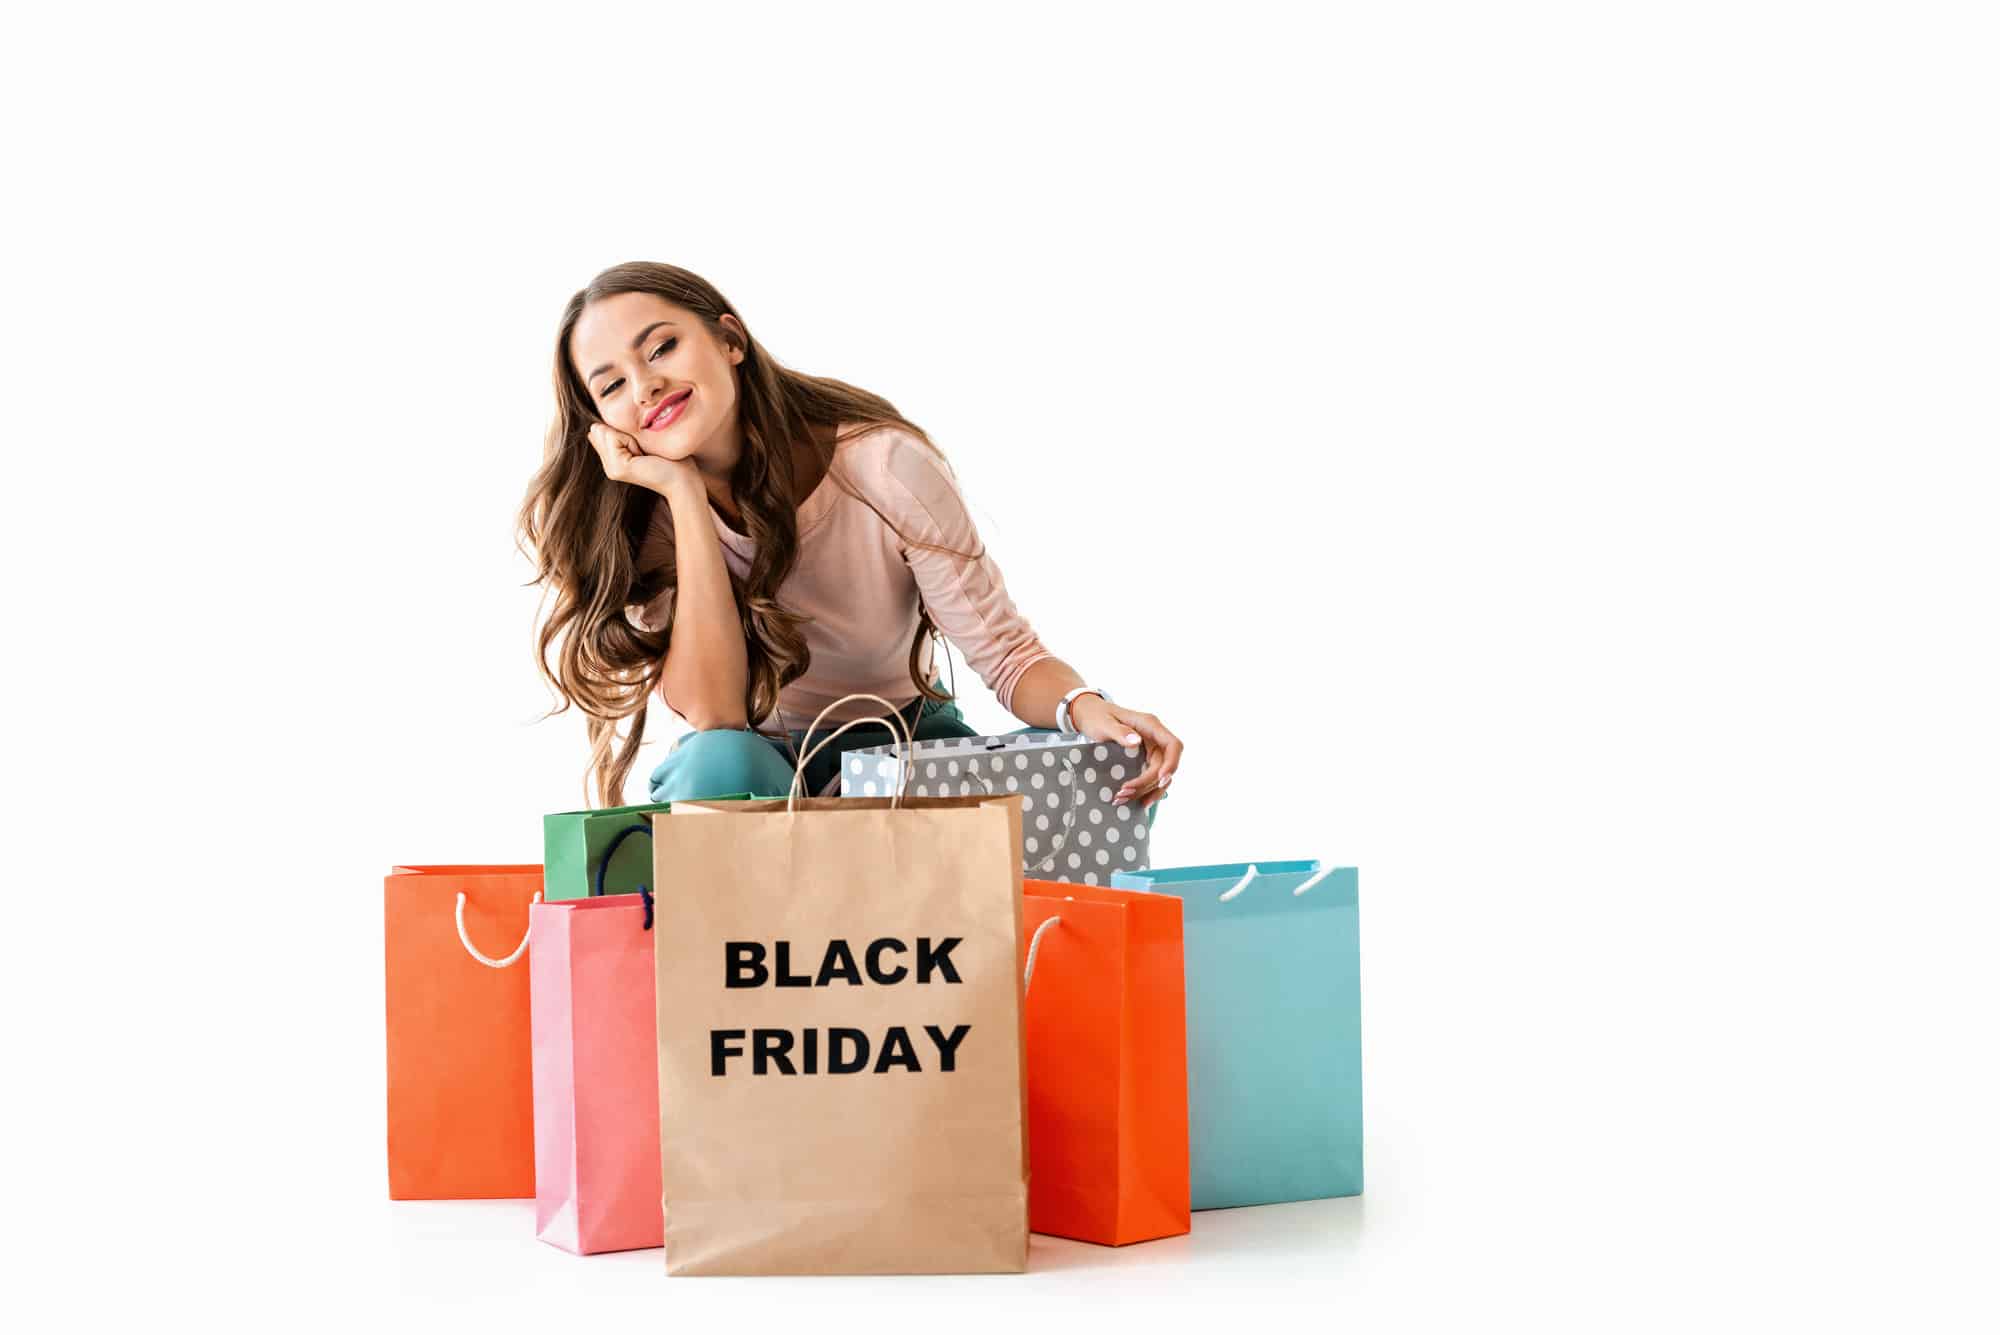 Lady with shopping bags that say Black Friday